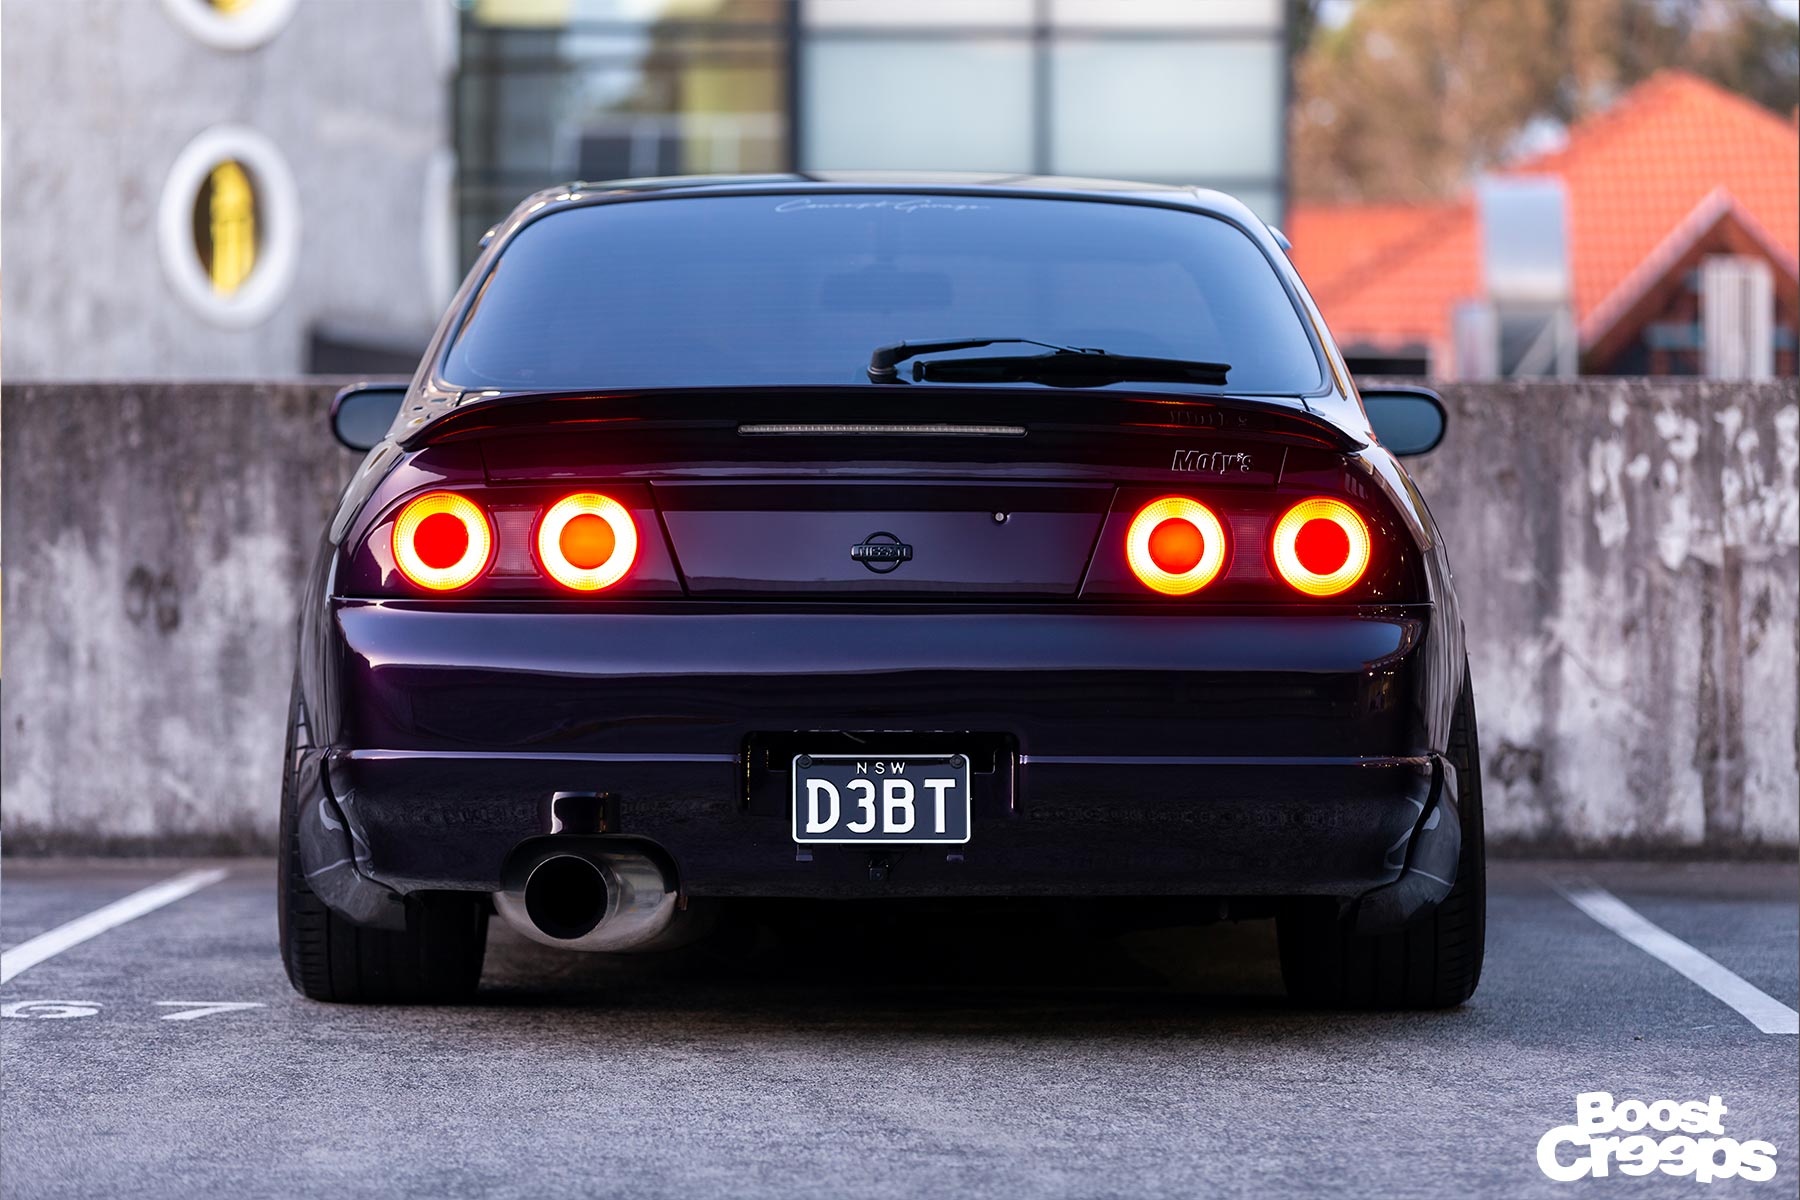 A R33 4 Door That’s Worth Going Into D3BT For